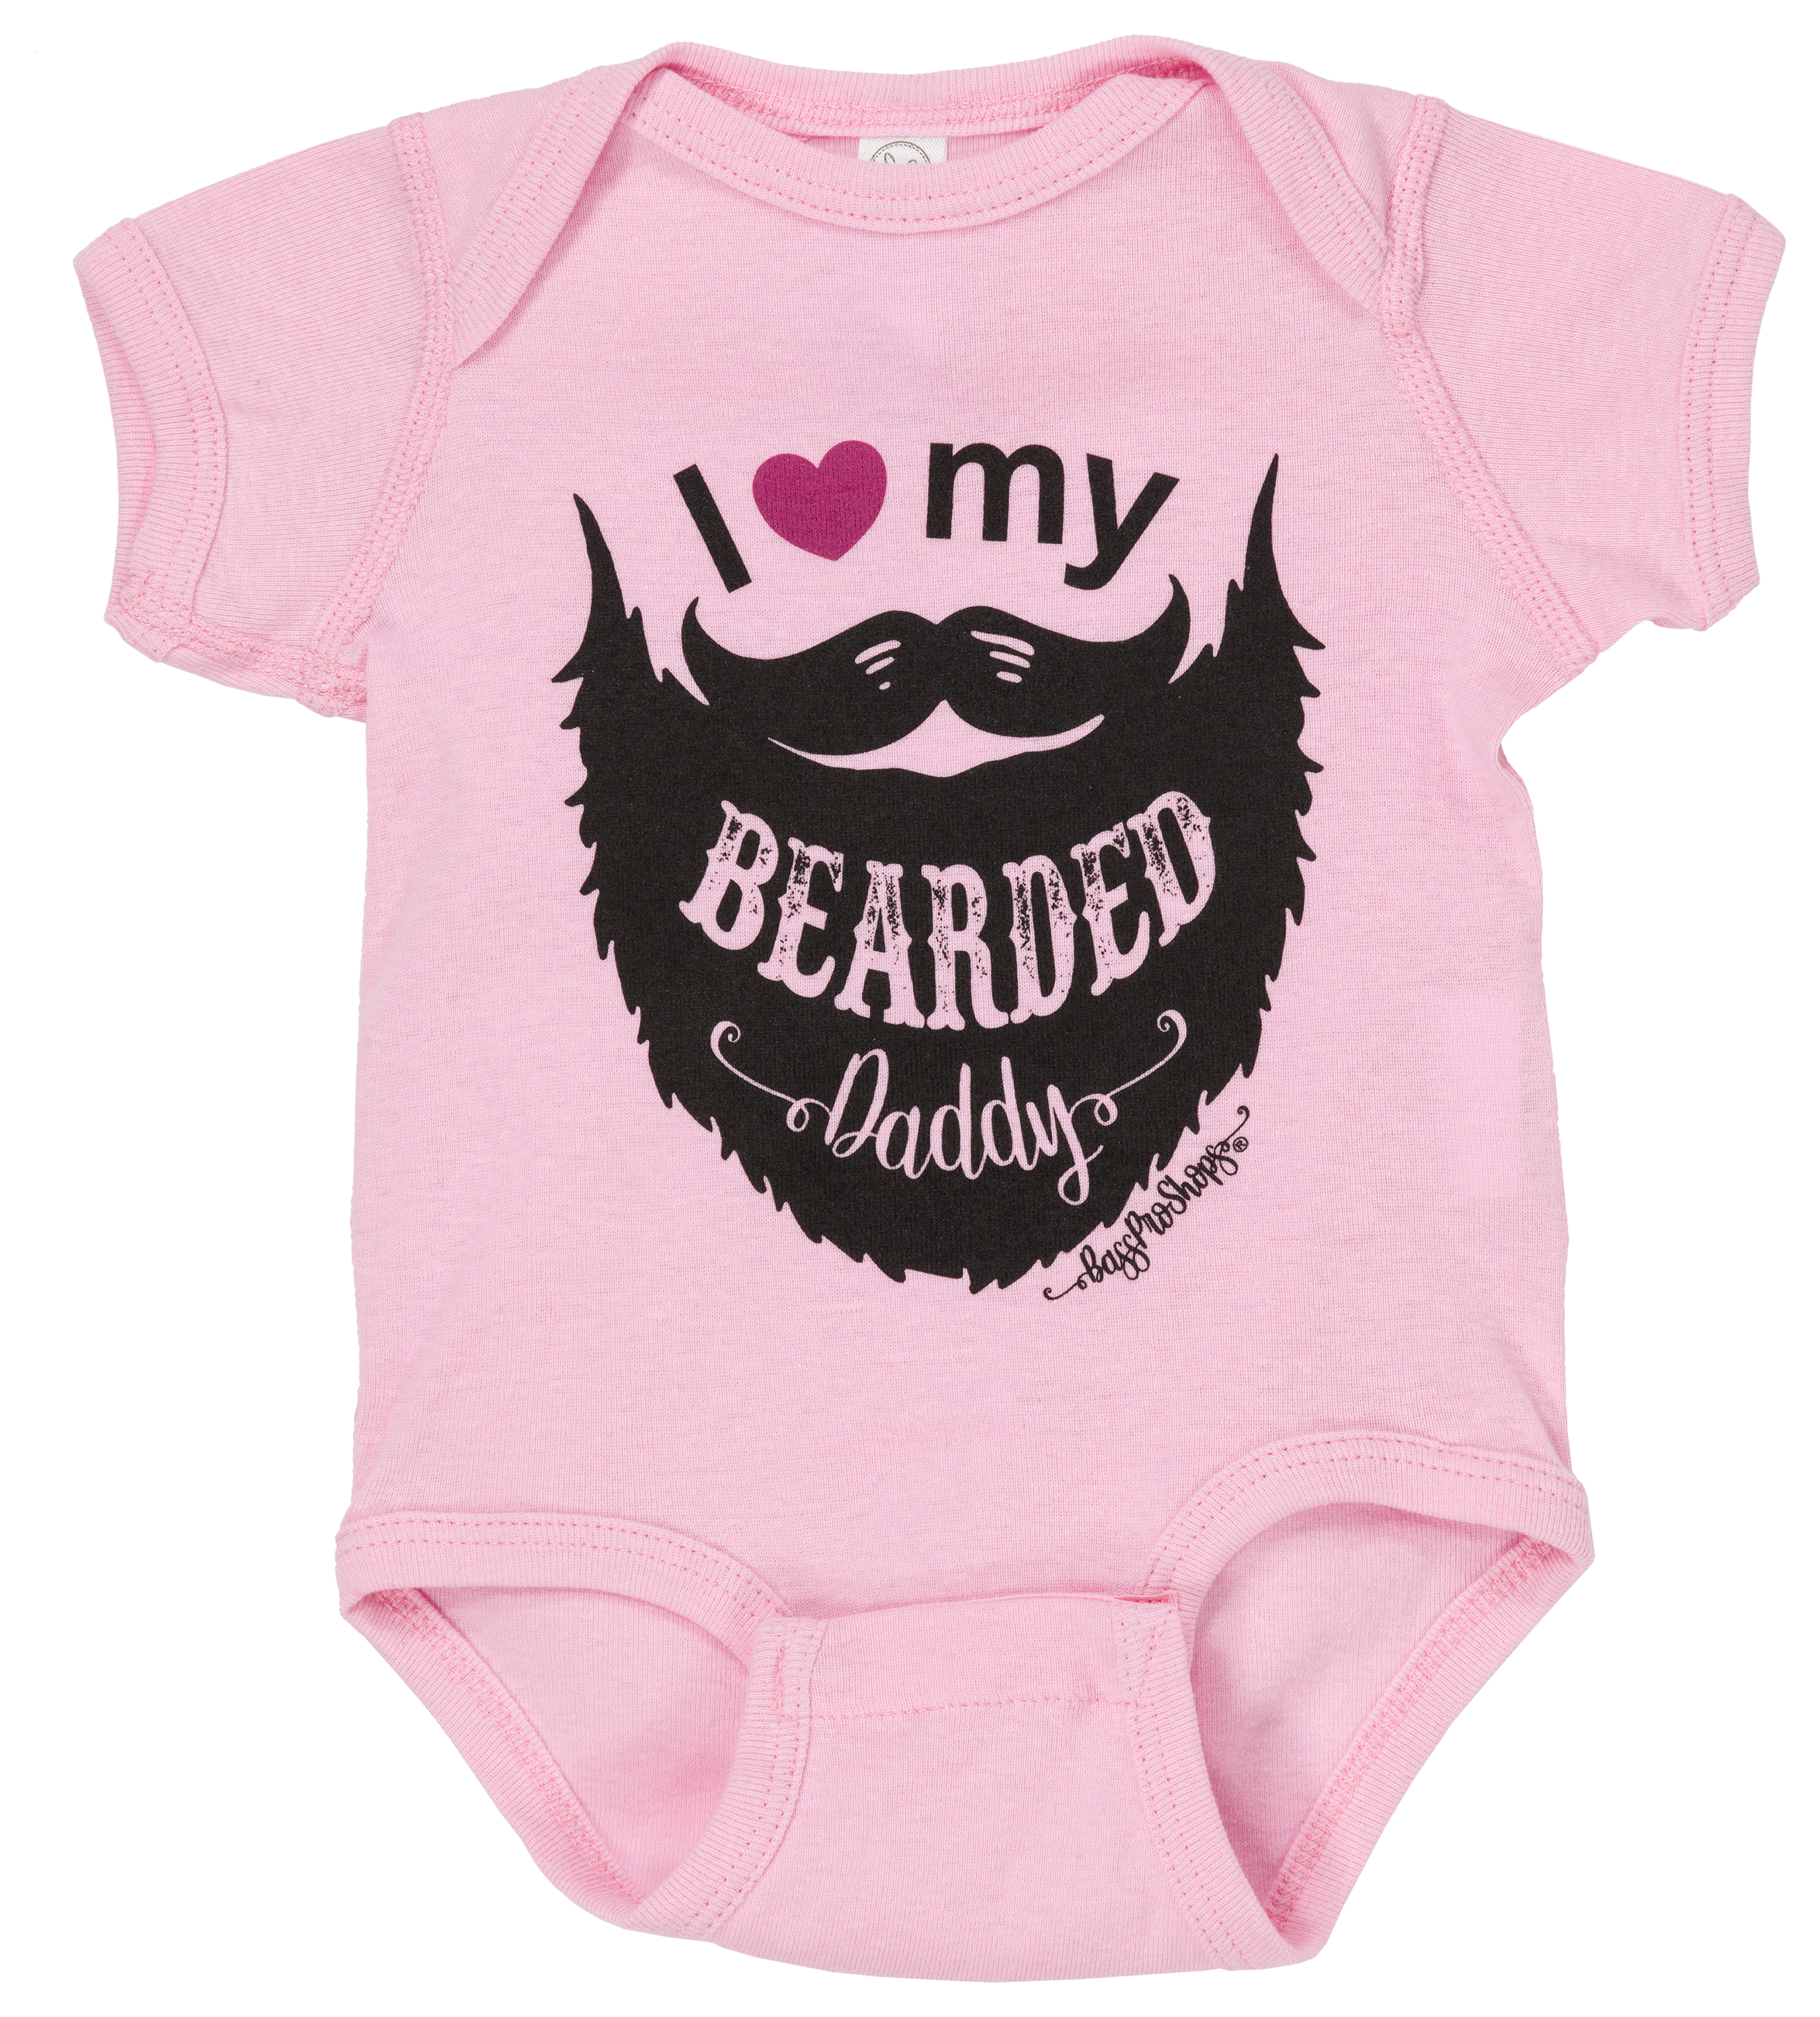 Bass Pro Shops I Heart My Bearded Daddy Short-Sleeve Bodysuit for Babies - Pink - 18 Months